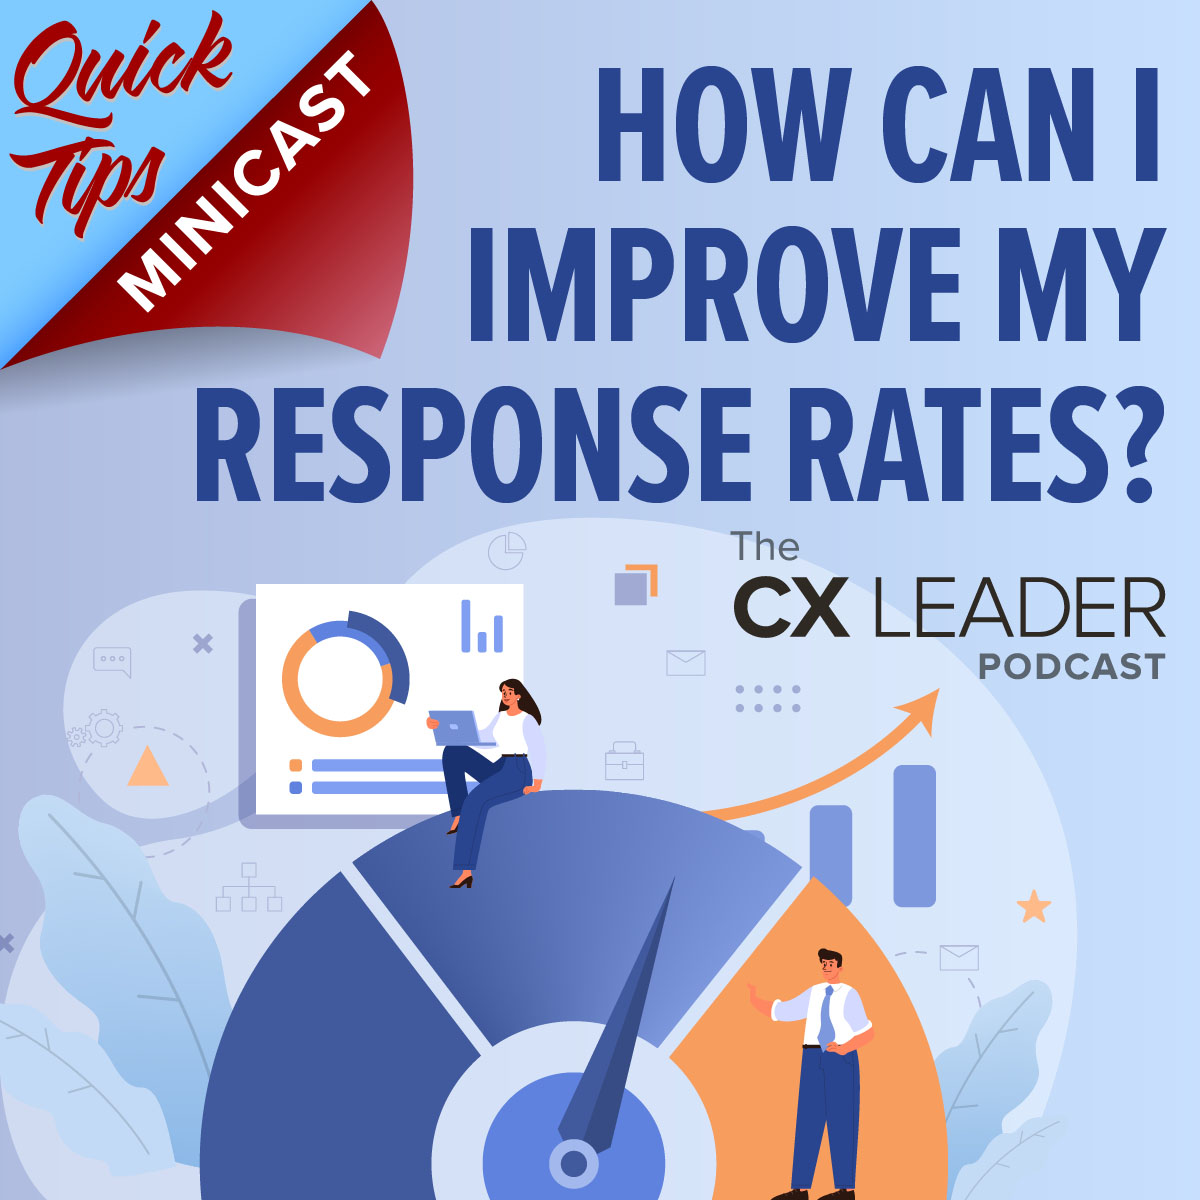 How can I improve my response rates?